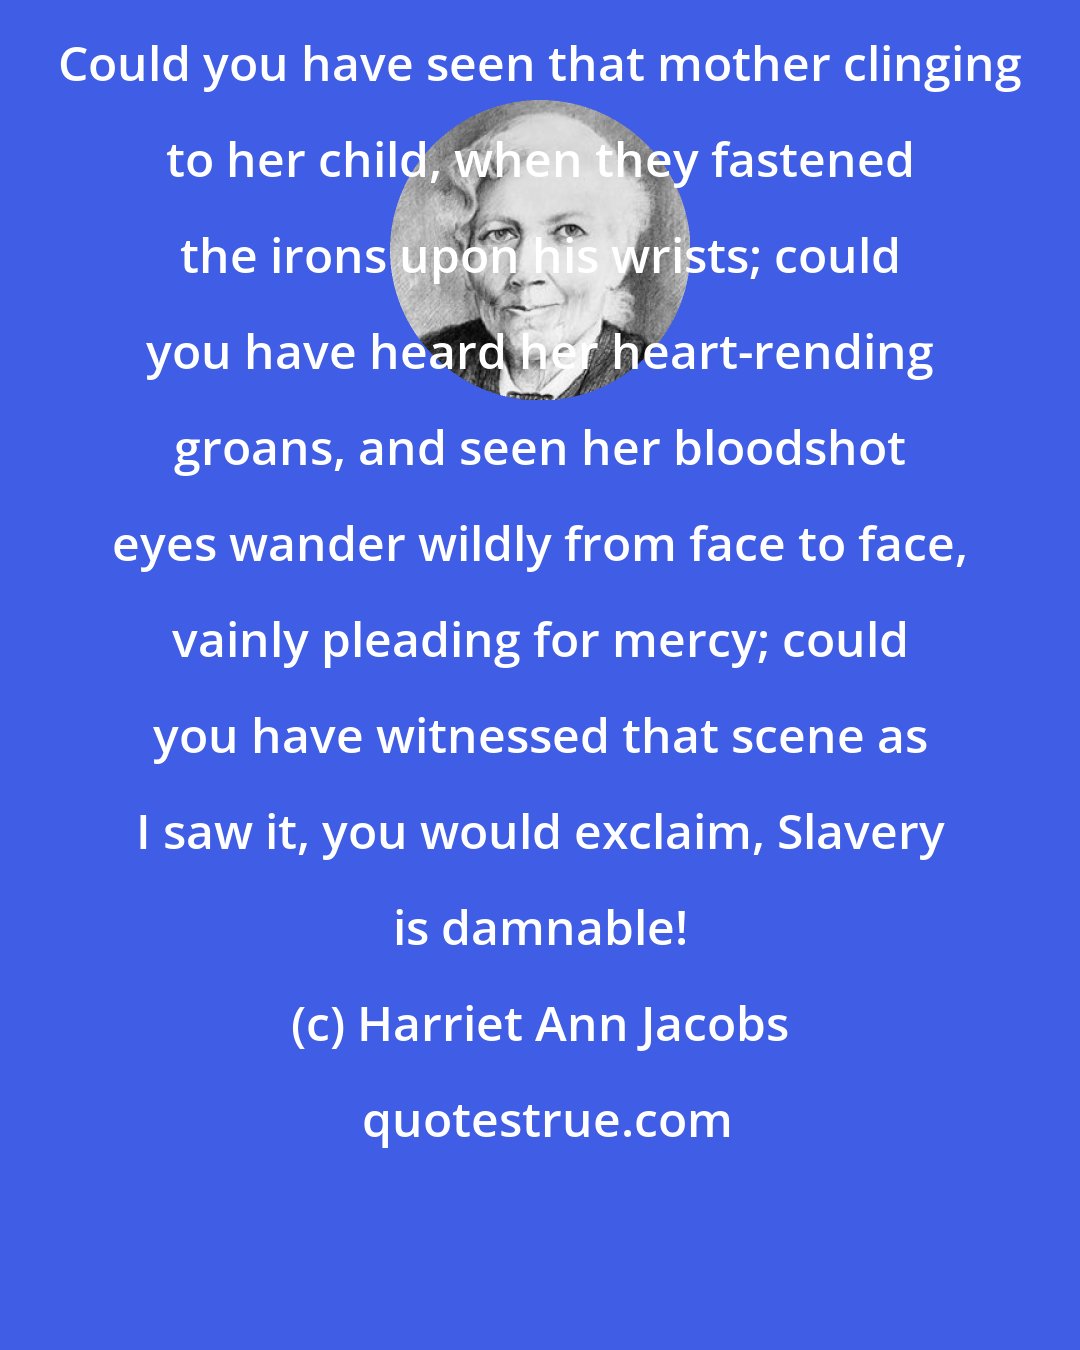 Harriet Ann Jacobs: Could you have seen that mother clinging to her child, when they fastened the irons upon his wrists; could you have heard her heart-rending groans, and seen her bloodshot eyes wander wildly from face to face, vainly pleading for mercy; could you have witnessed that scene as I saw it, you would exclaim, Slavery is damnable!